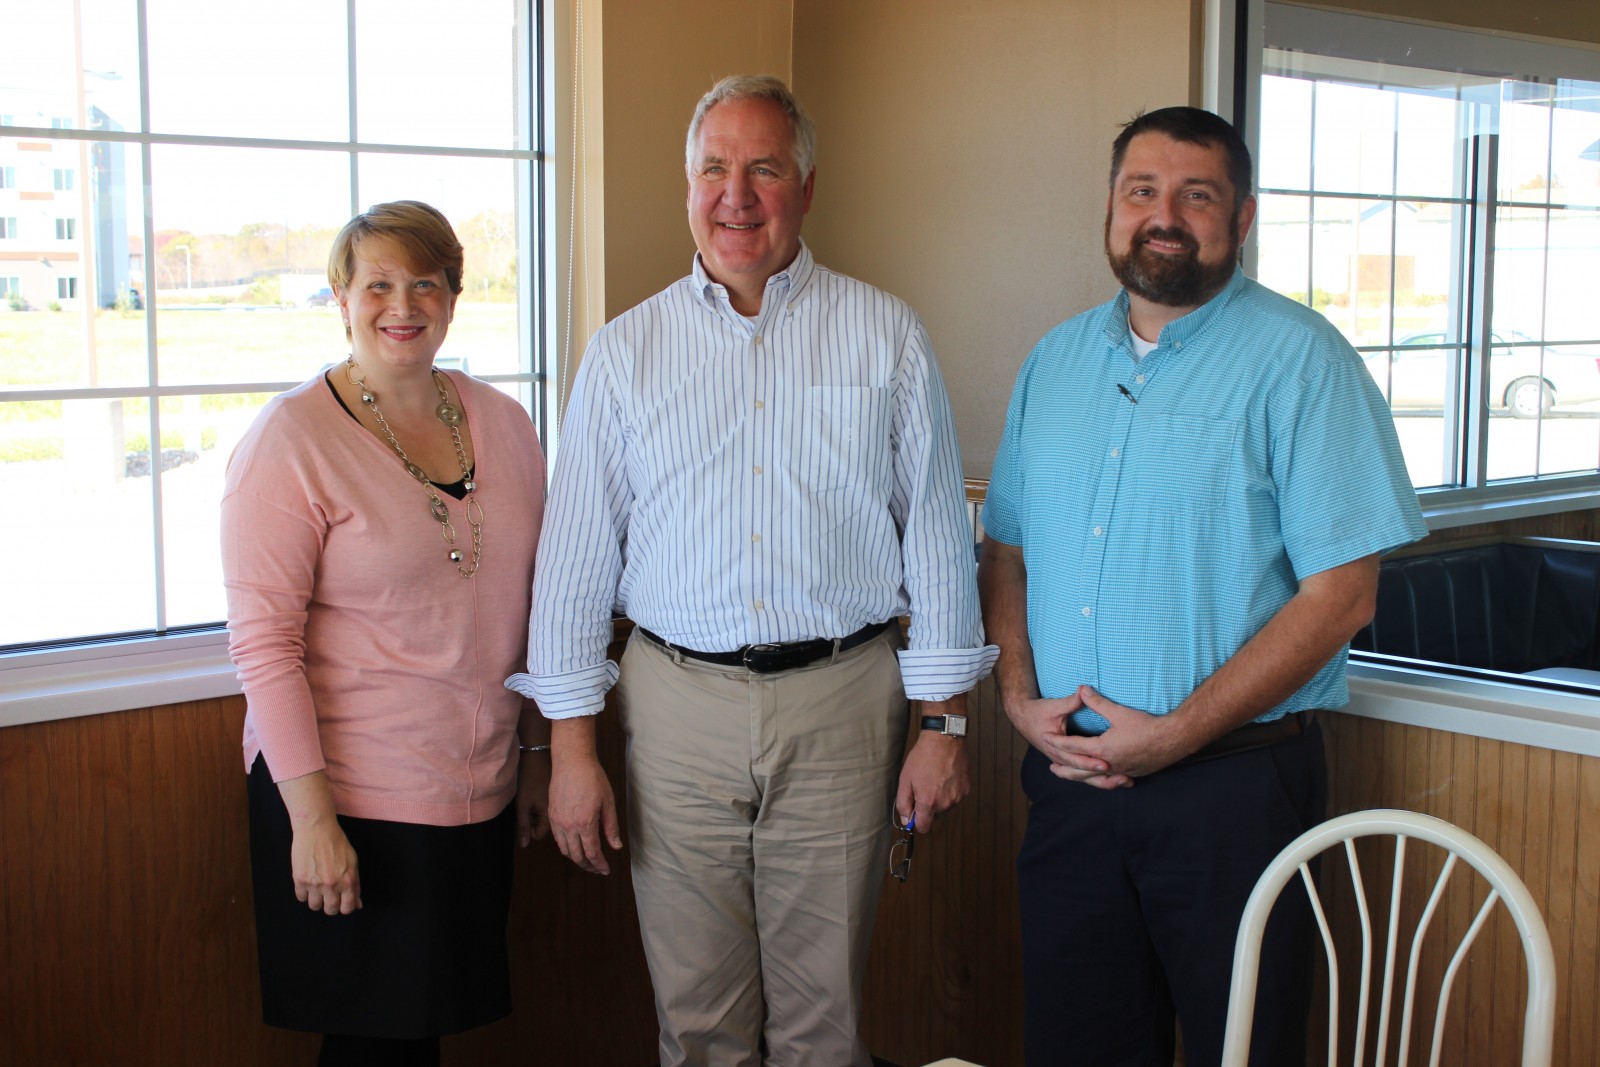 Pictured (L-R) National Association of Restaurants Director of Healthcare Policy Robin Goracke, Congressman John Shimkus (IL-15), and Culver's Co-Owner Chris Debolt